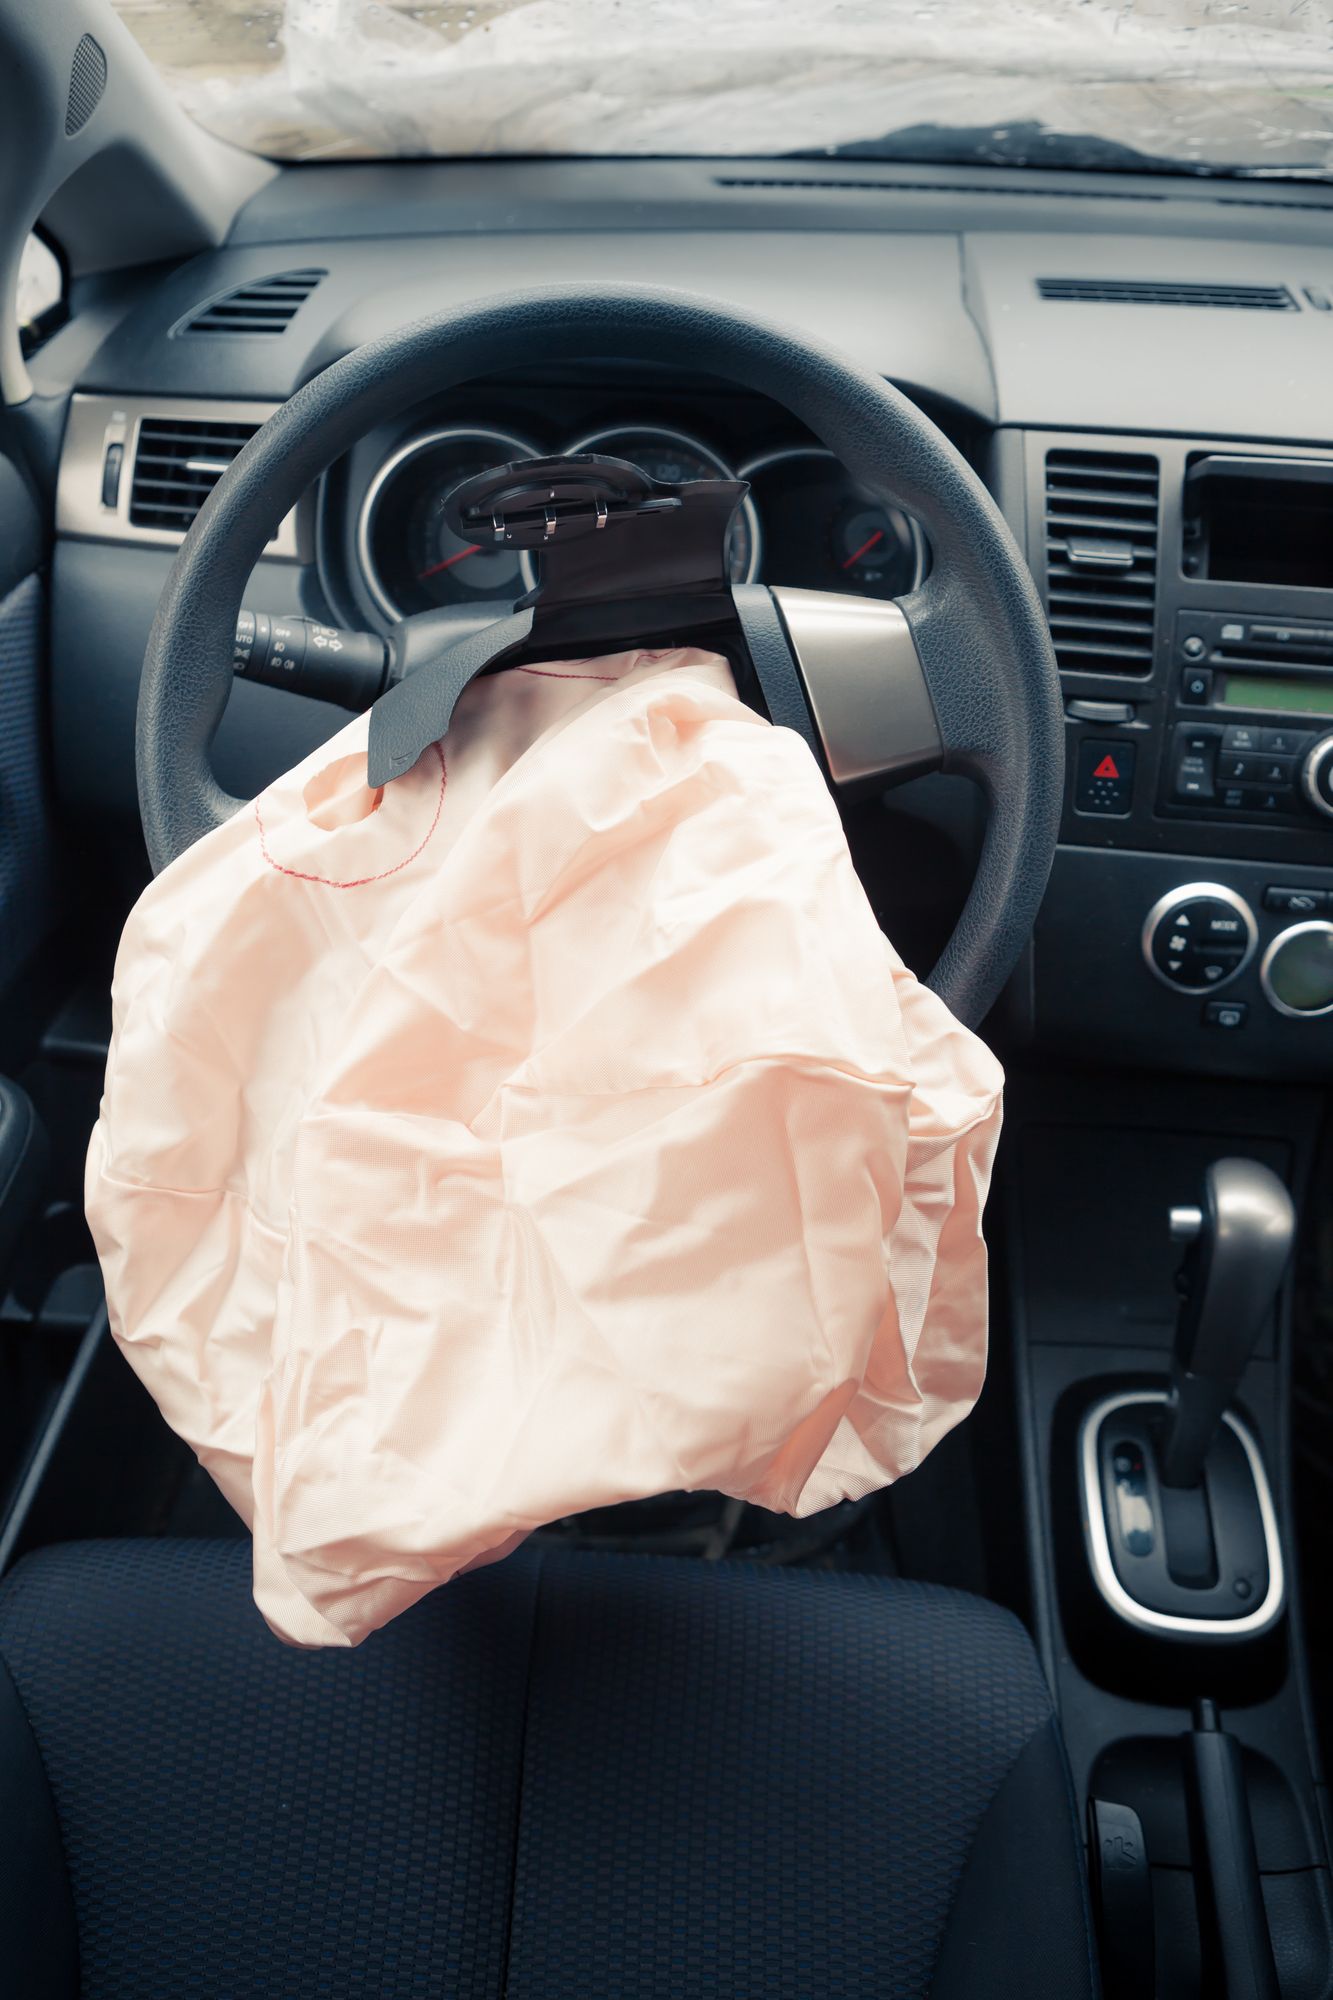 GM Frontal Airbag Recall Defect Dangerous, Consumers Say Top Class